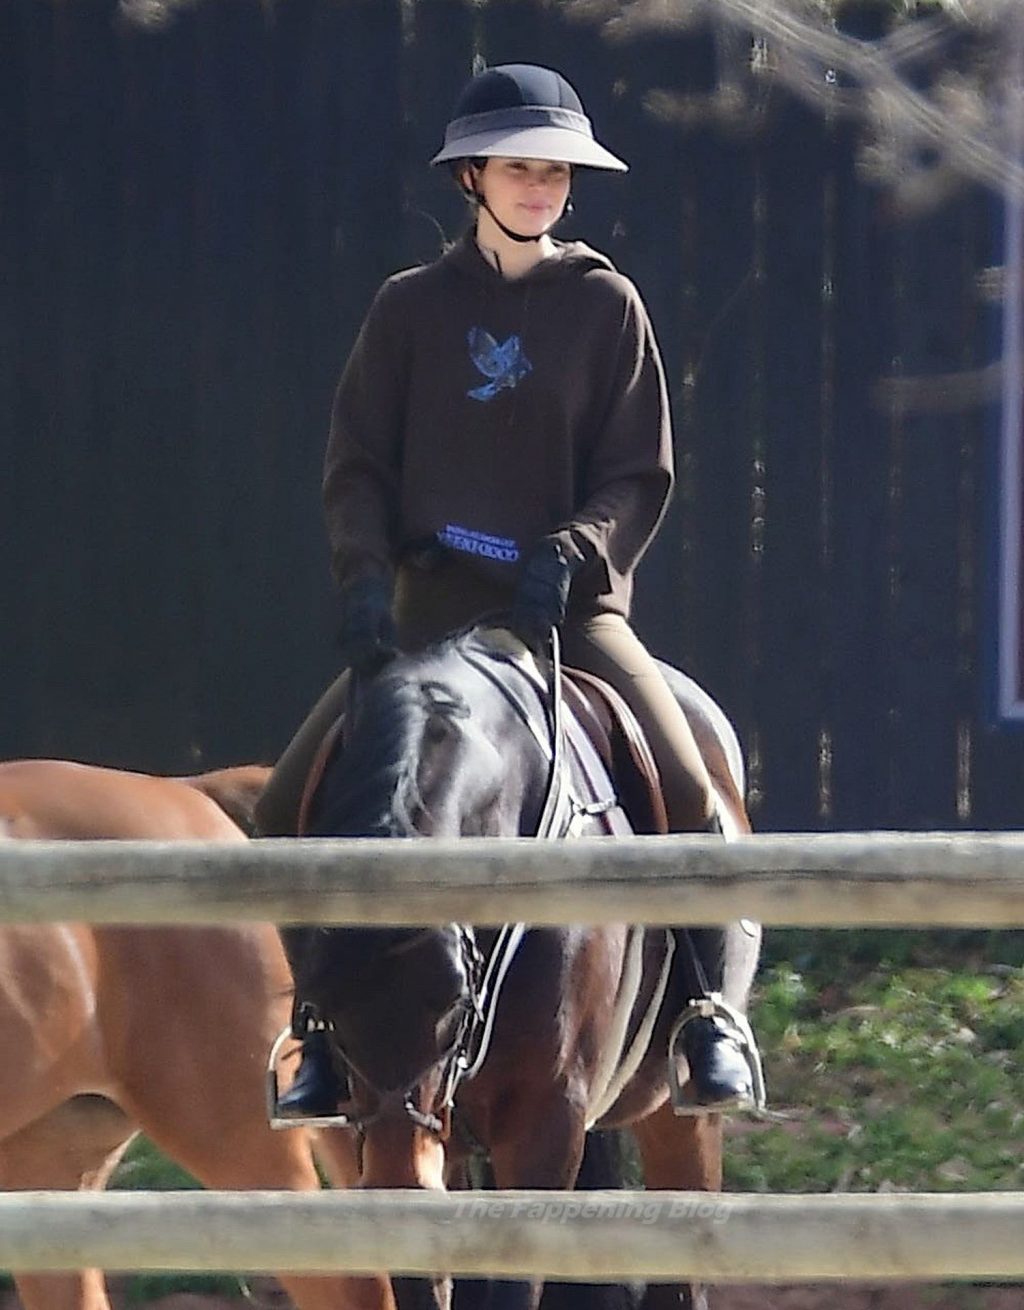 Kendall Jenner Looks Giddy as She Gets in the Saddle for a horseback Ride in Malibu (29 Photos)